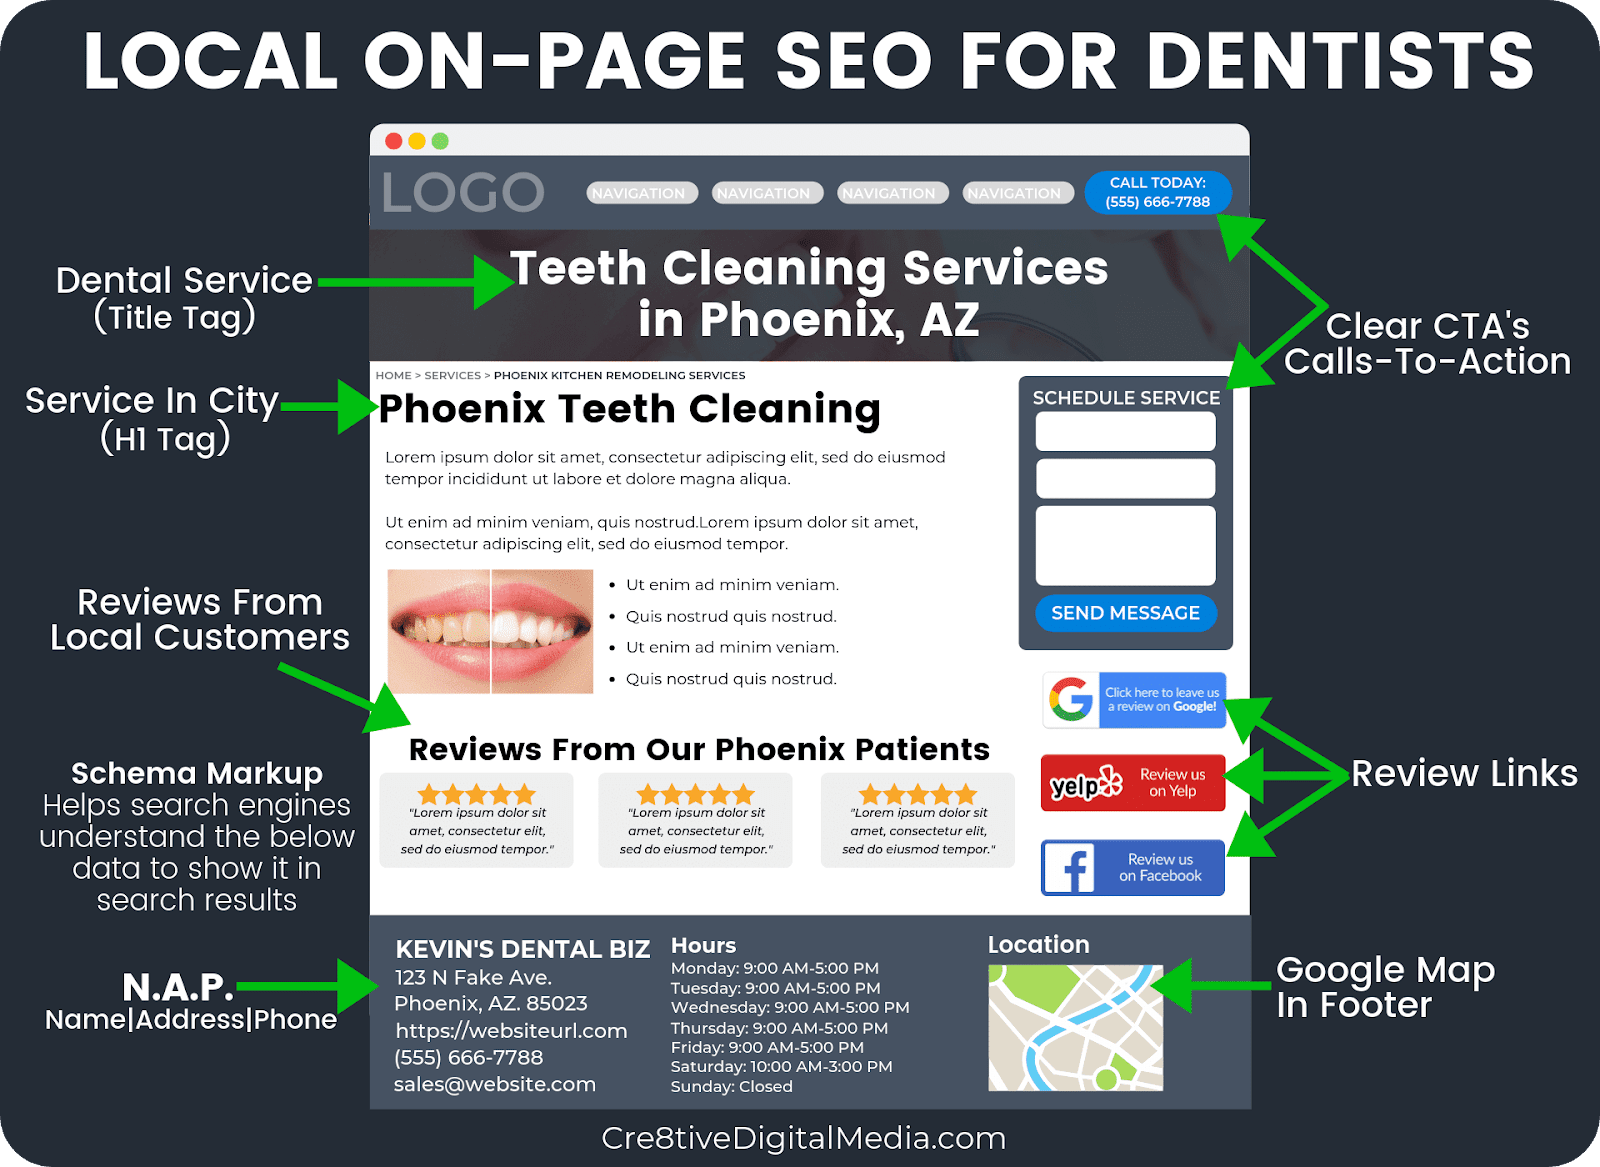 Local On-Page Optimizations For Dentists